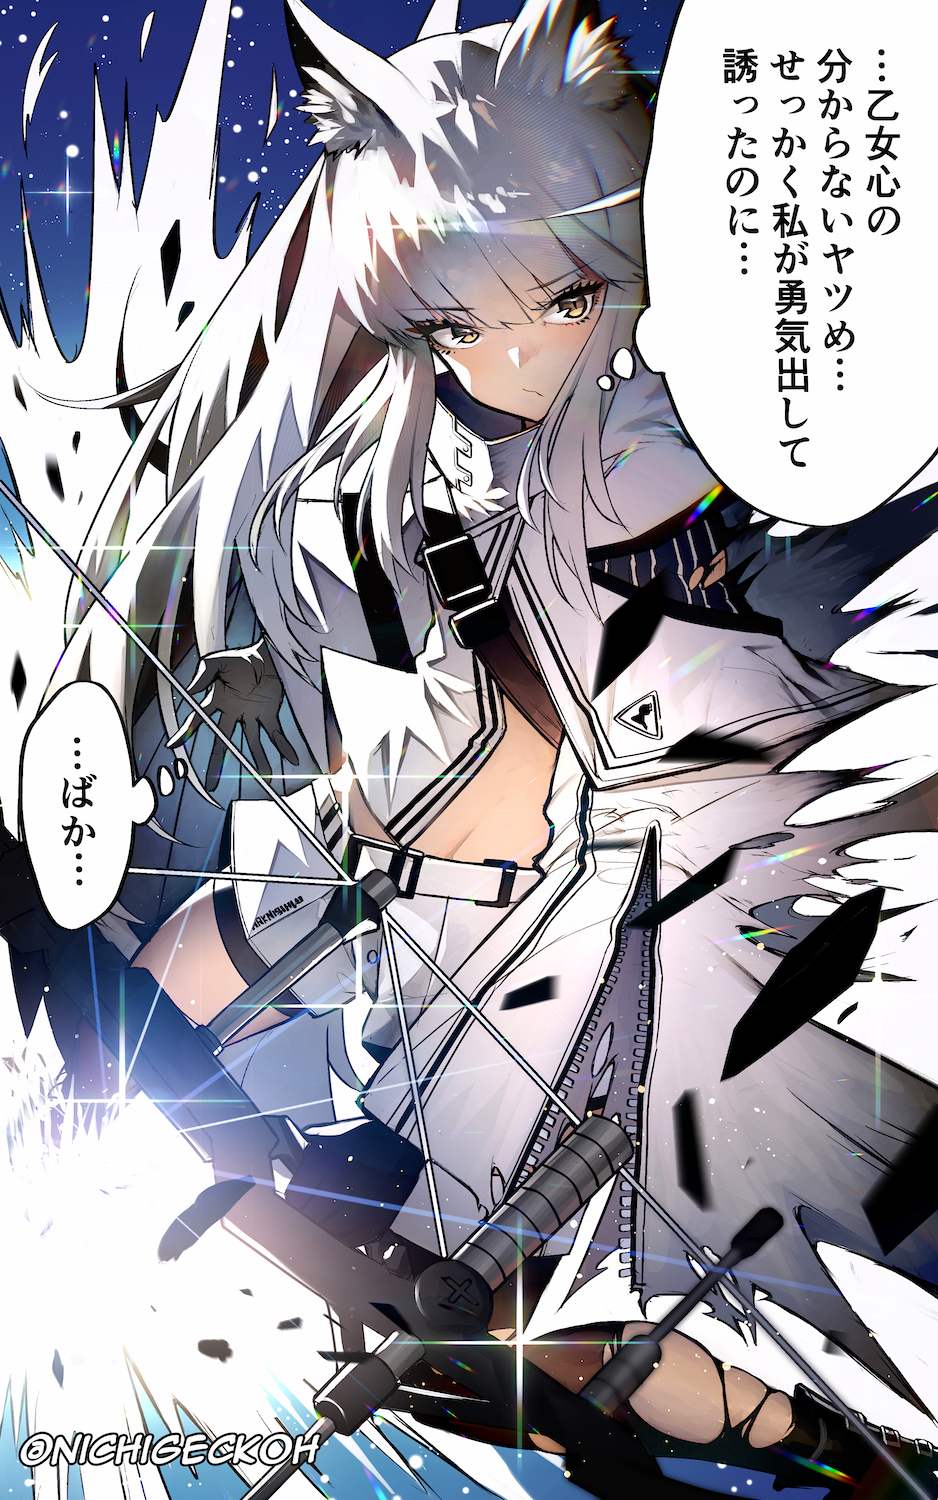 1girl animal_ear_fluff animal_ears arknights bangs black_legwear bow_(weapon) brown_eyes cloak compound_bow eyebrows_visible_through_hair highres holding holding_bow_(weapon) holding_weapon horse_ears long_hair looking_at_viewer nichigeckoh platinum_(arknights) shorts sidelocks solo thigh-highs torn_clothes torn_legwear translation_request twitter_username weapon white_cloak white_hair white_shorts